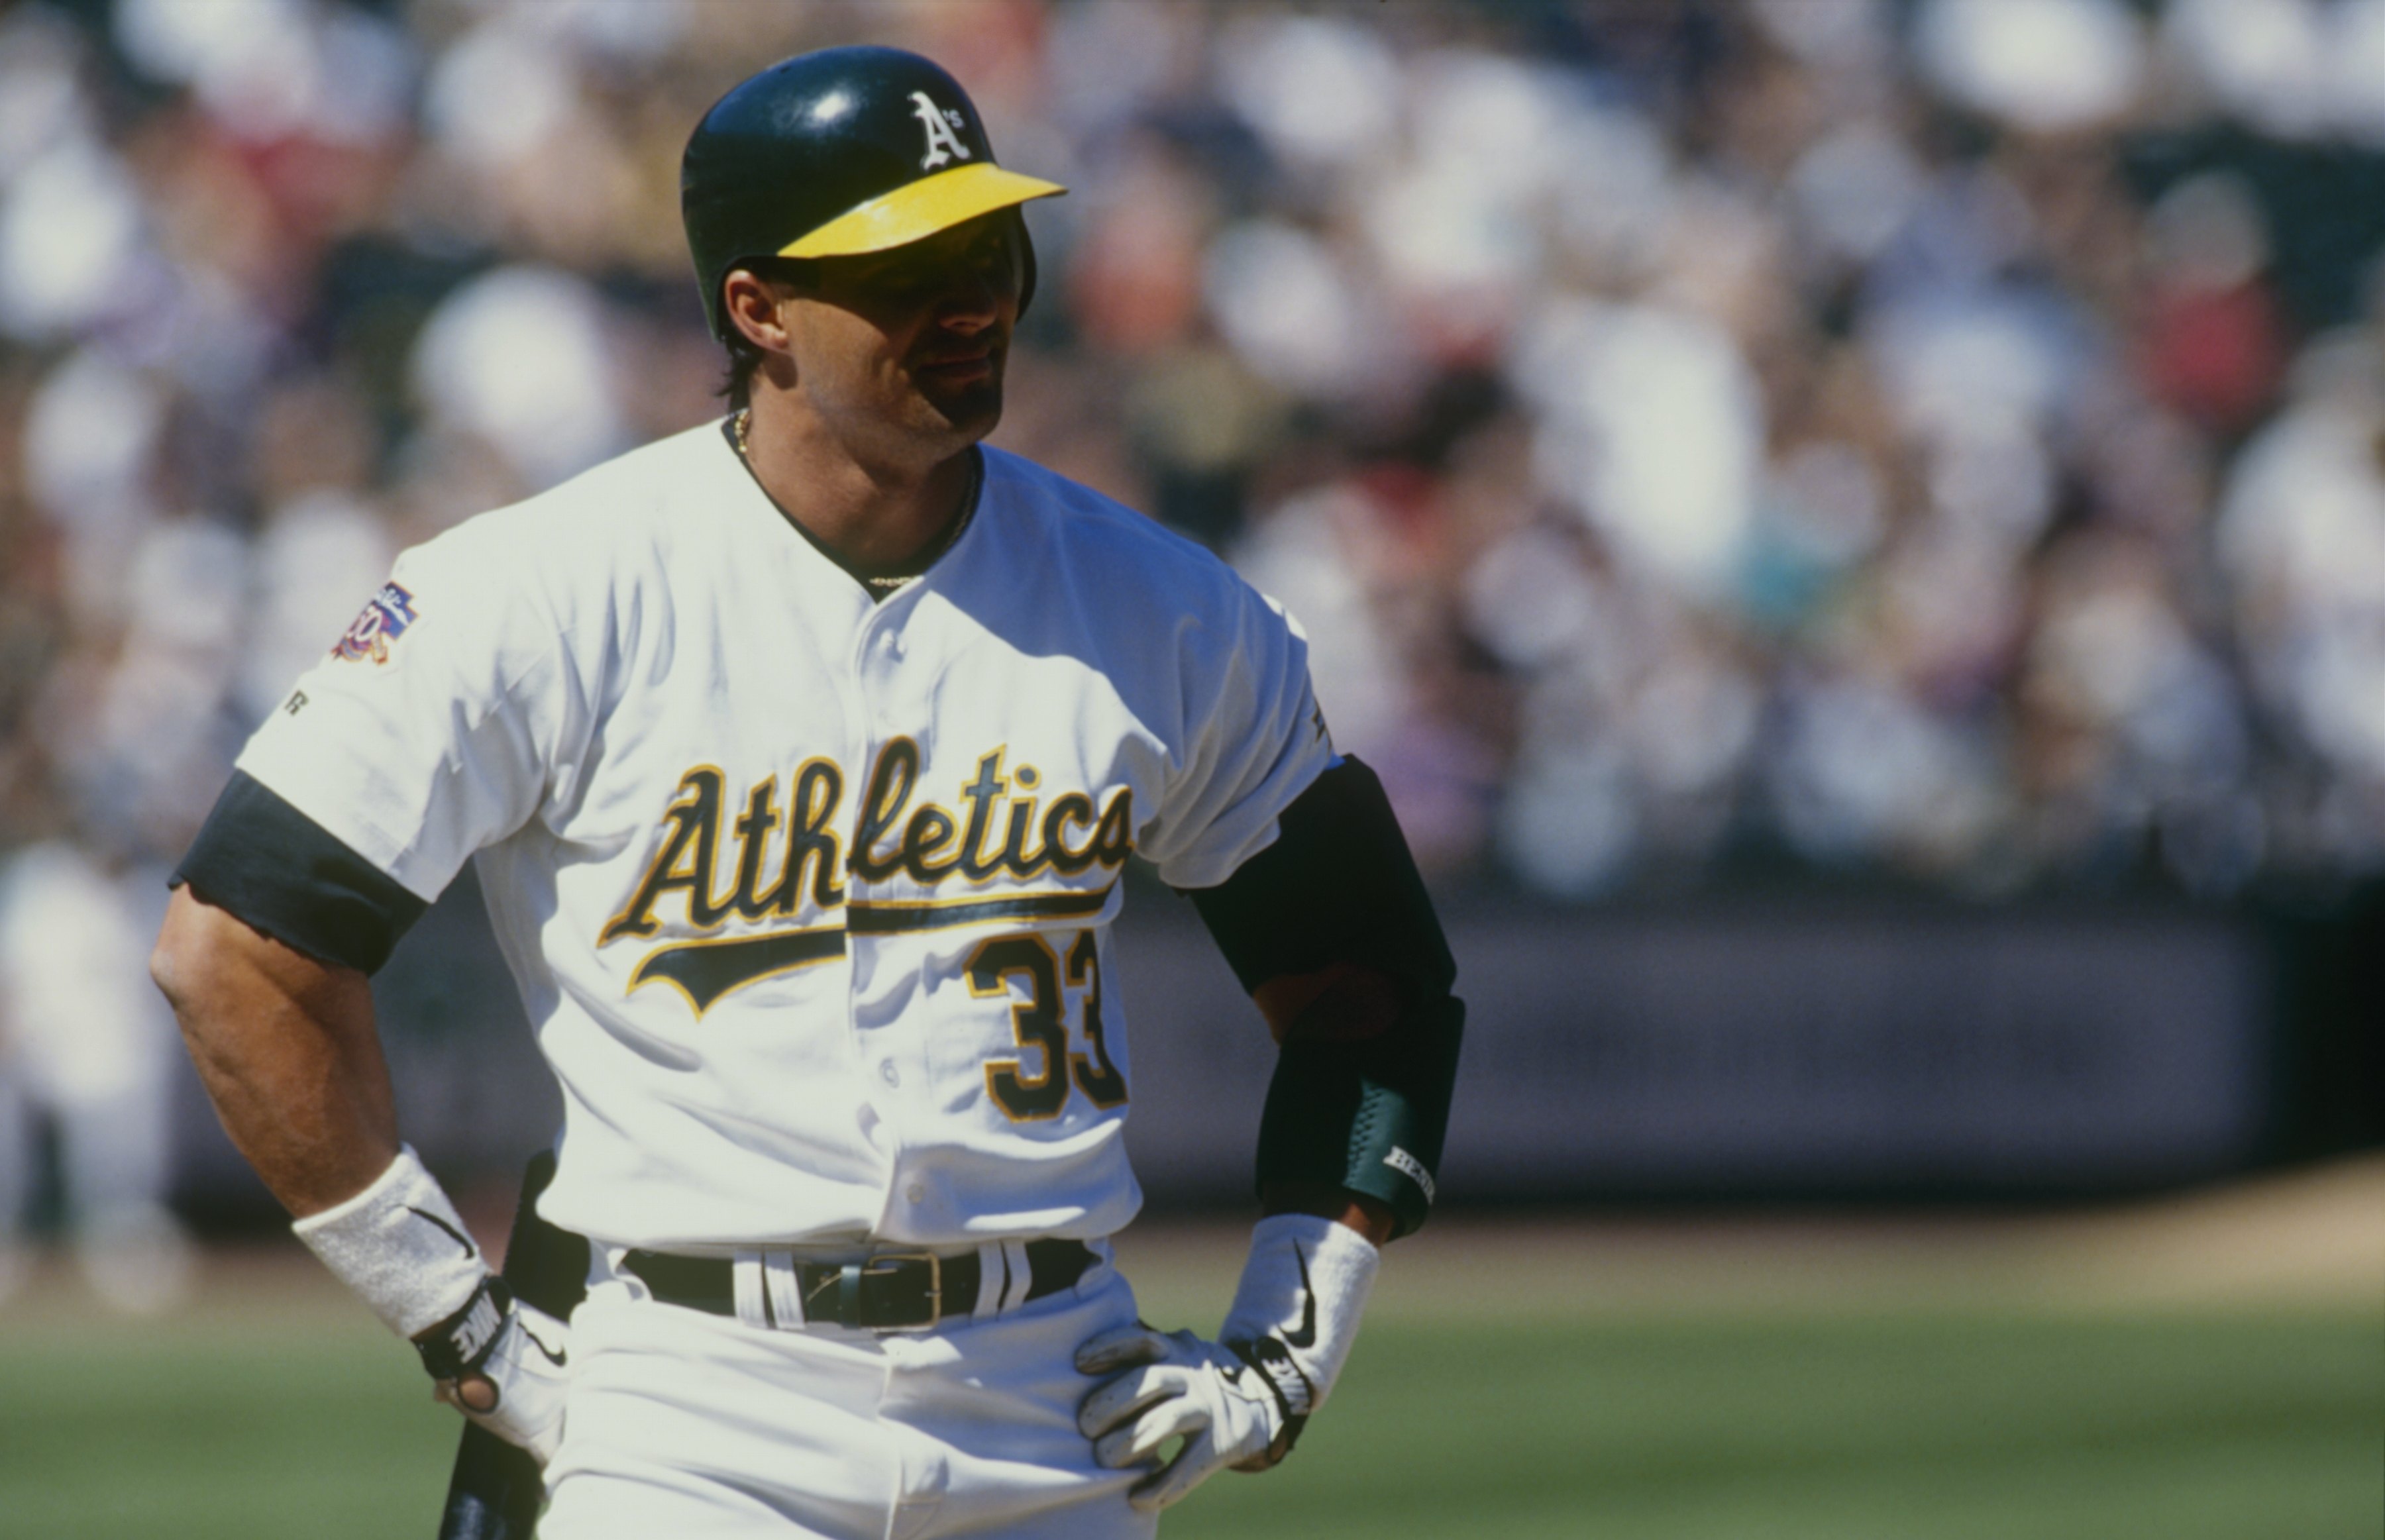 OAKLAND, CA - APRIL 3:  Jose Canseco of the Oakland Athletics looks on during the game against the Cleveland Indians at Oakland-Alameda County Coliseum on April 3, 1997 in Oakland, California. (Photo by Otto Greule Jr/Getty Images)